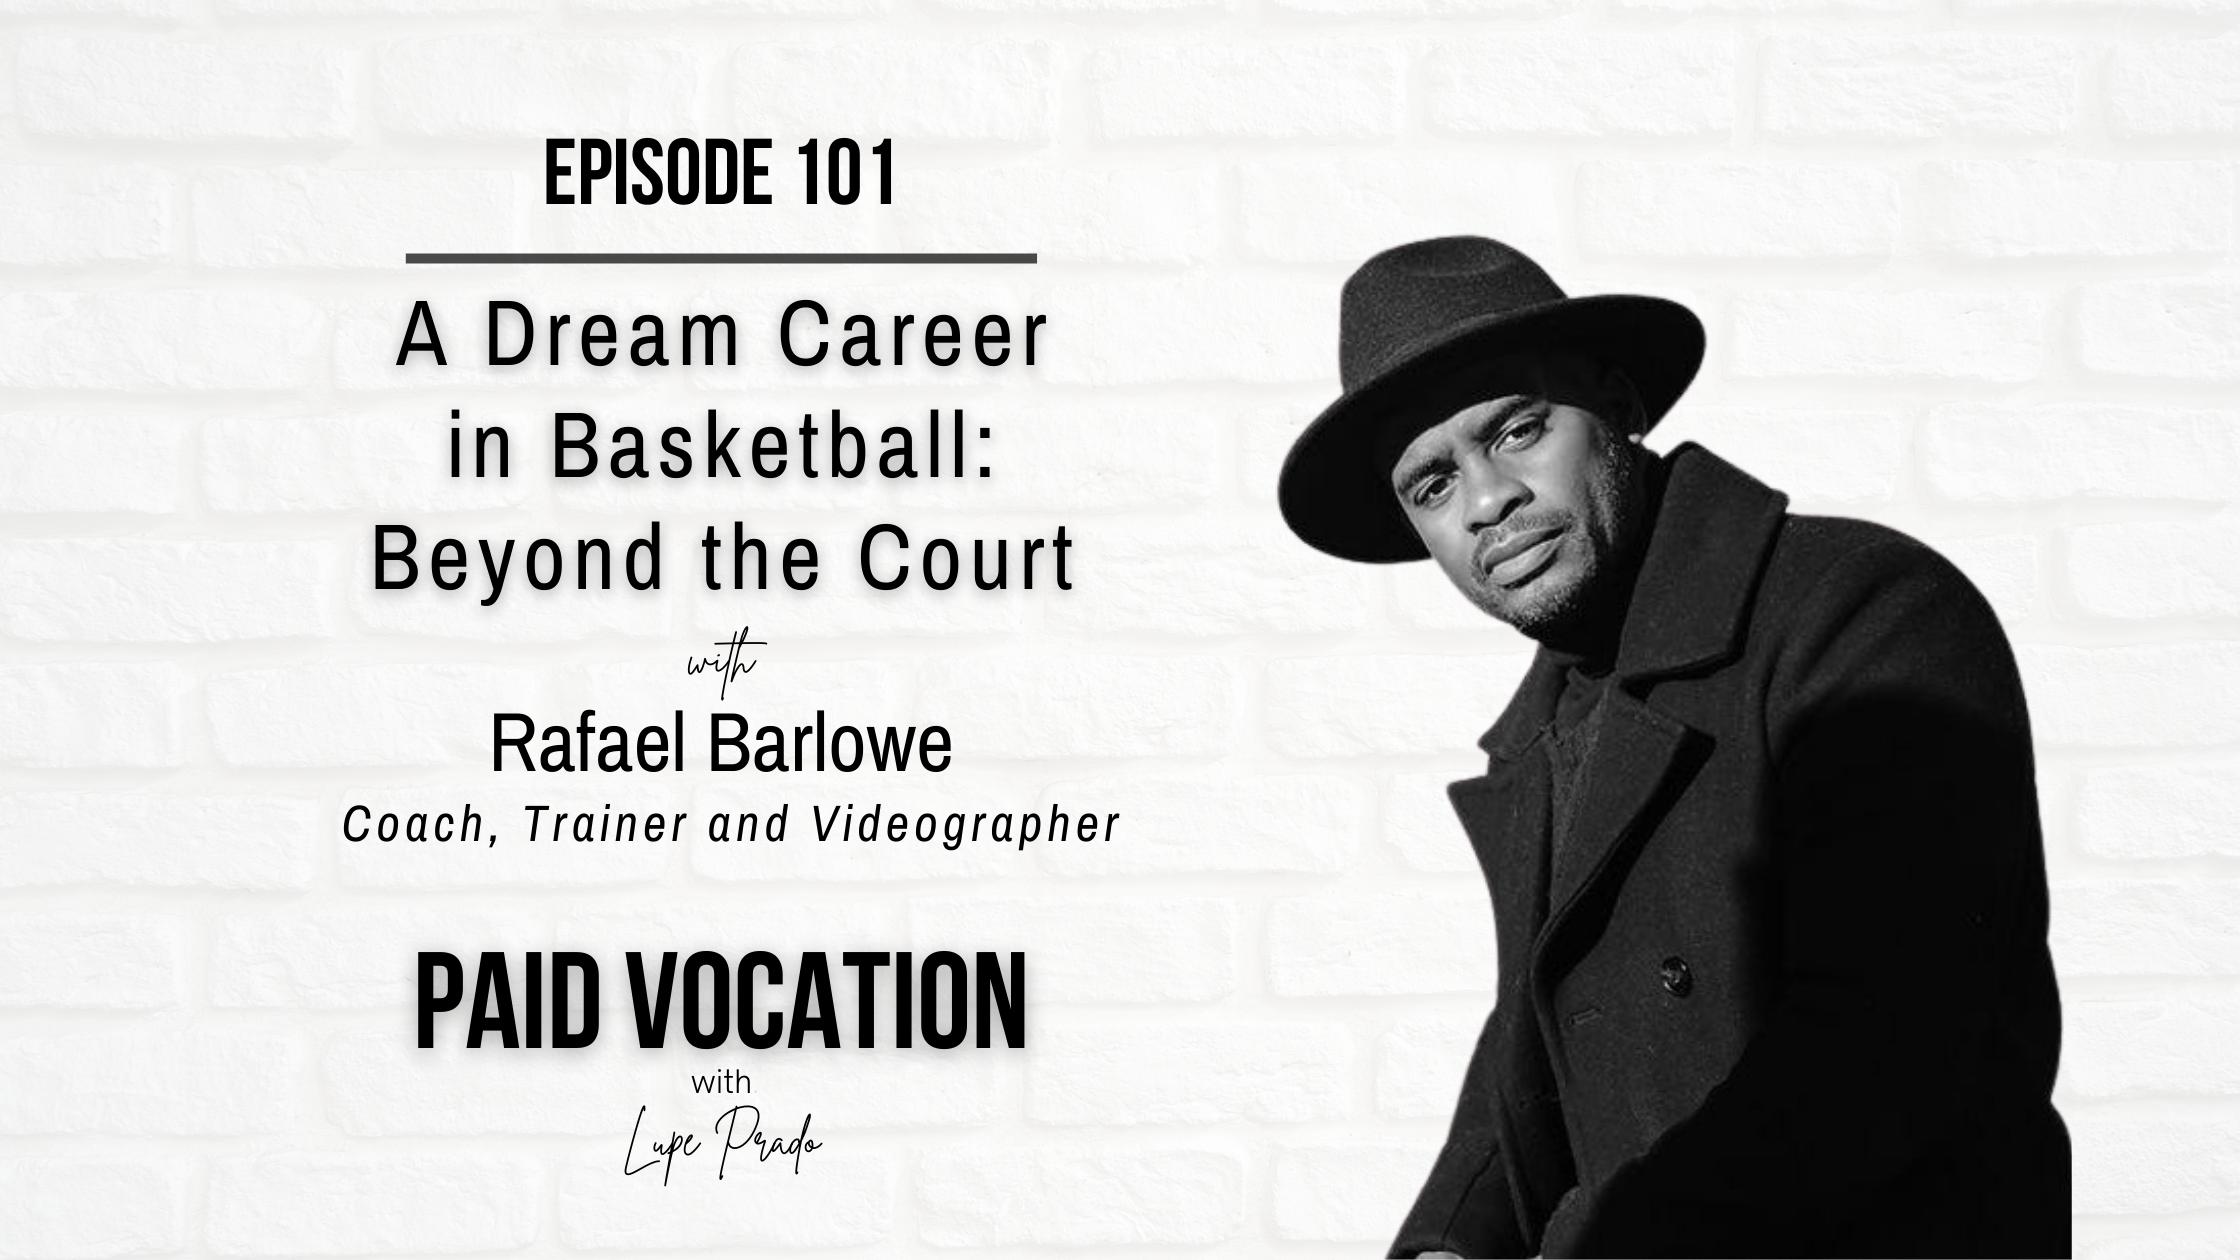 A Dream Career in Basketball: Beyond the Court with Rafael Barlowe